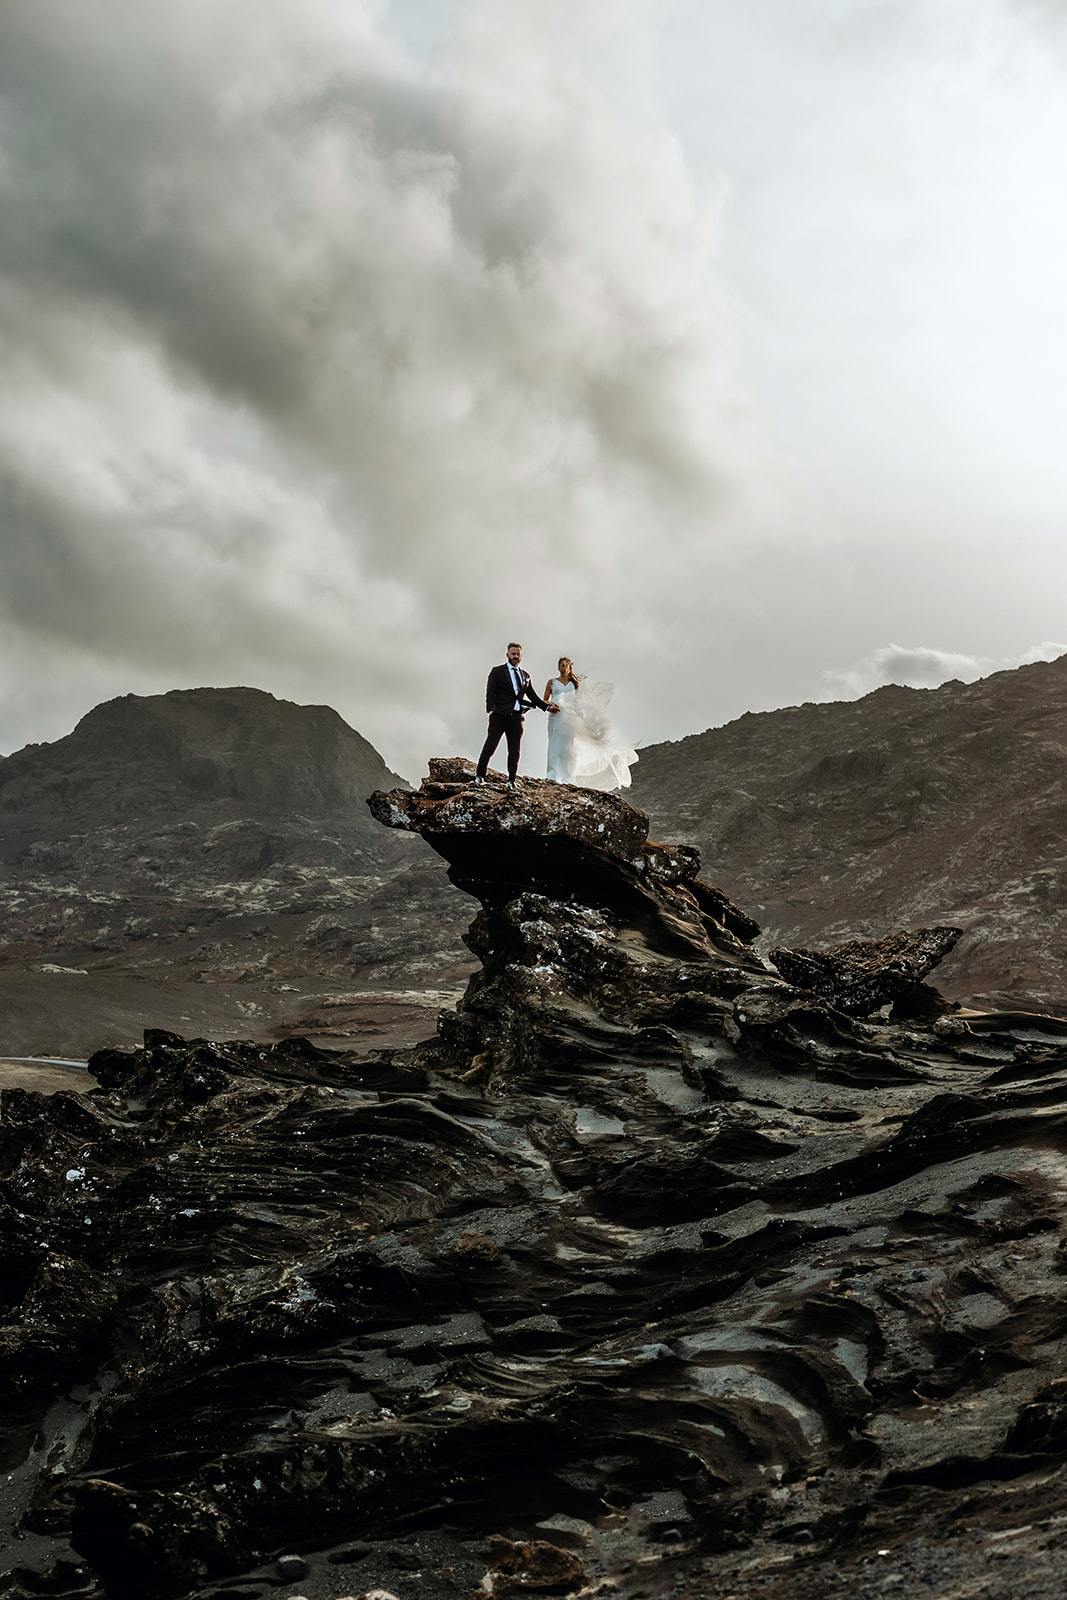 Couple who eloped in Iceland is climbing up on a dramatic cliff